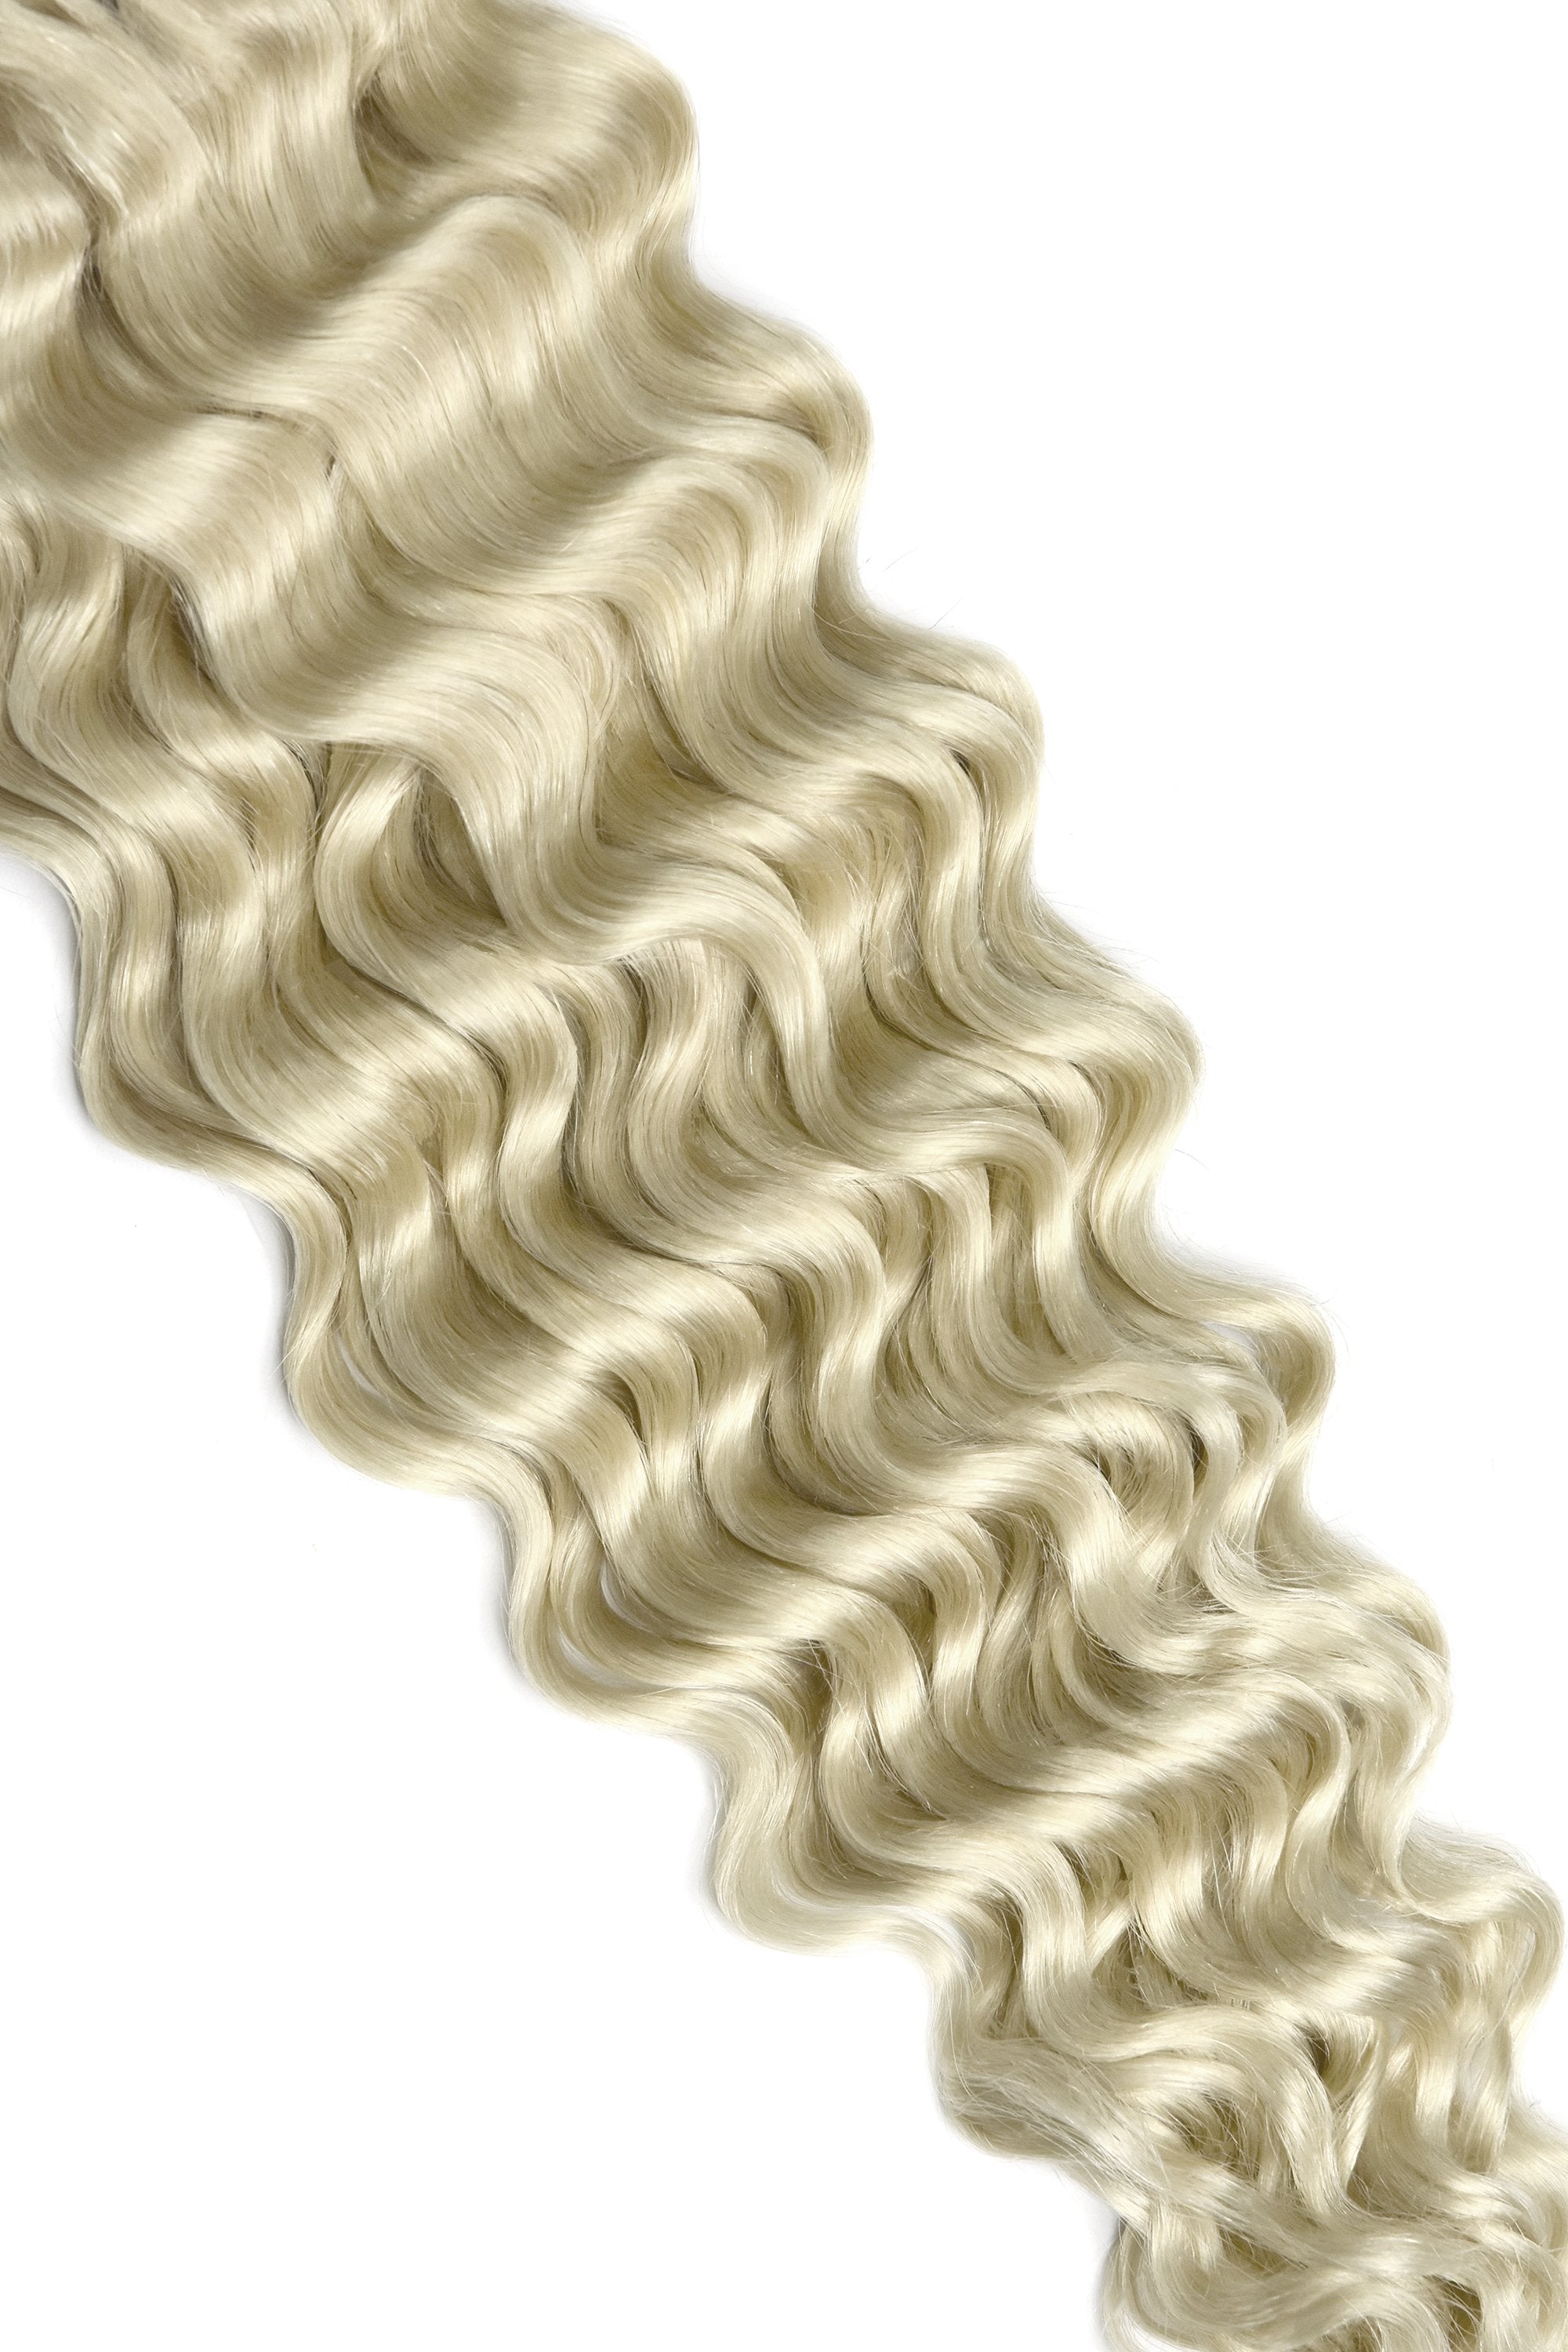 curly human hair extensions type c - shade ice blonde